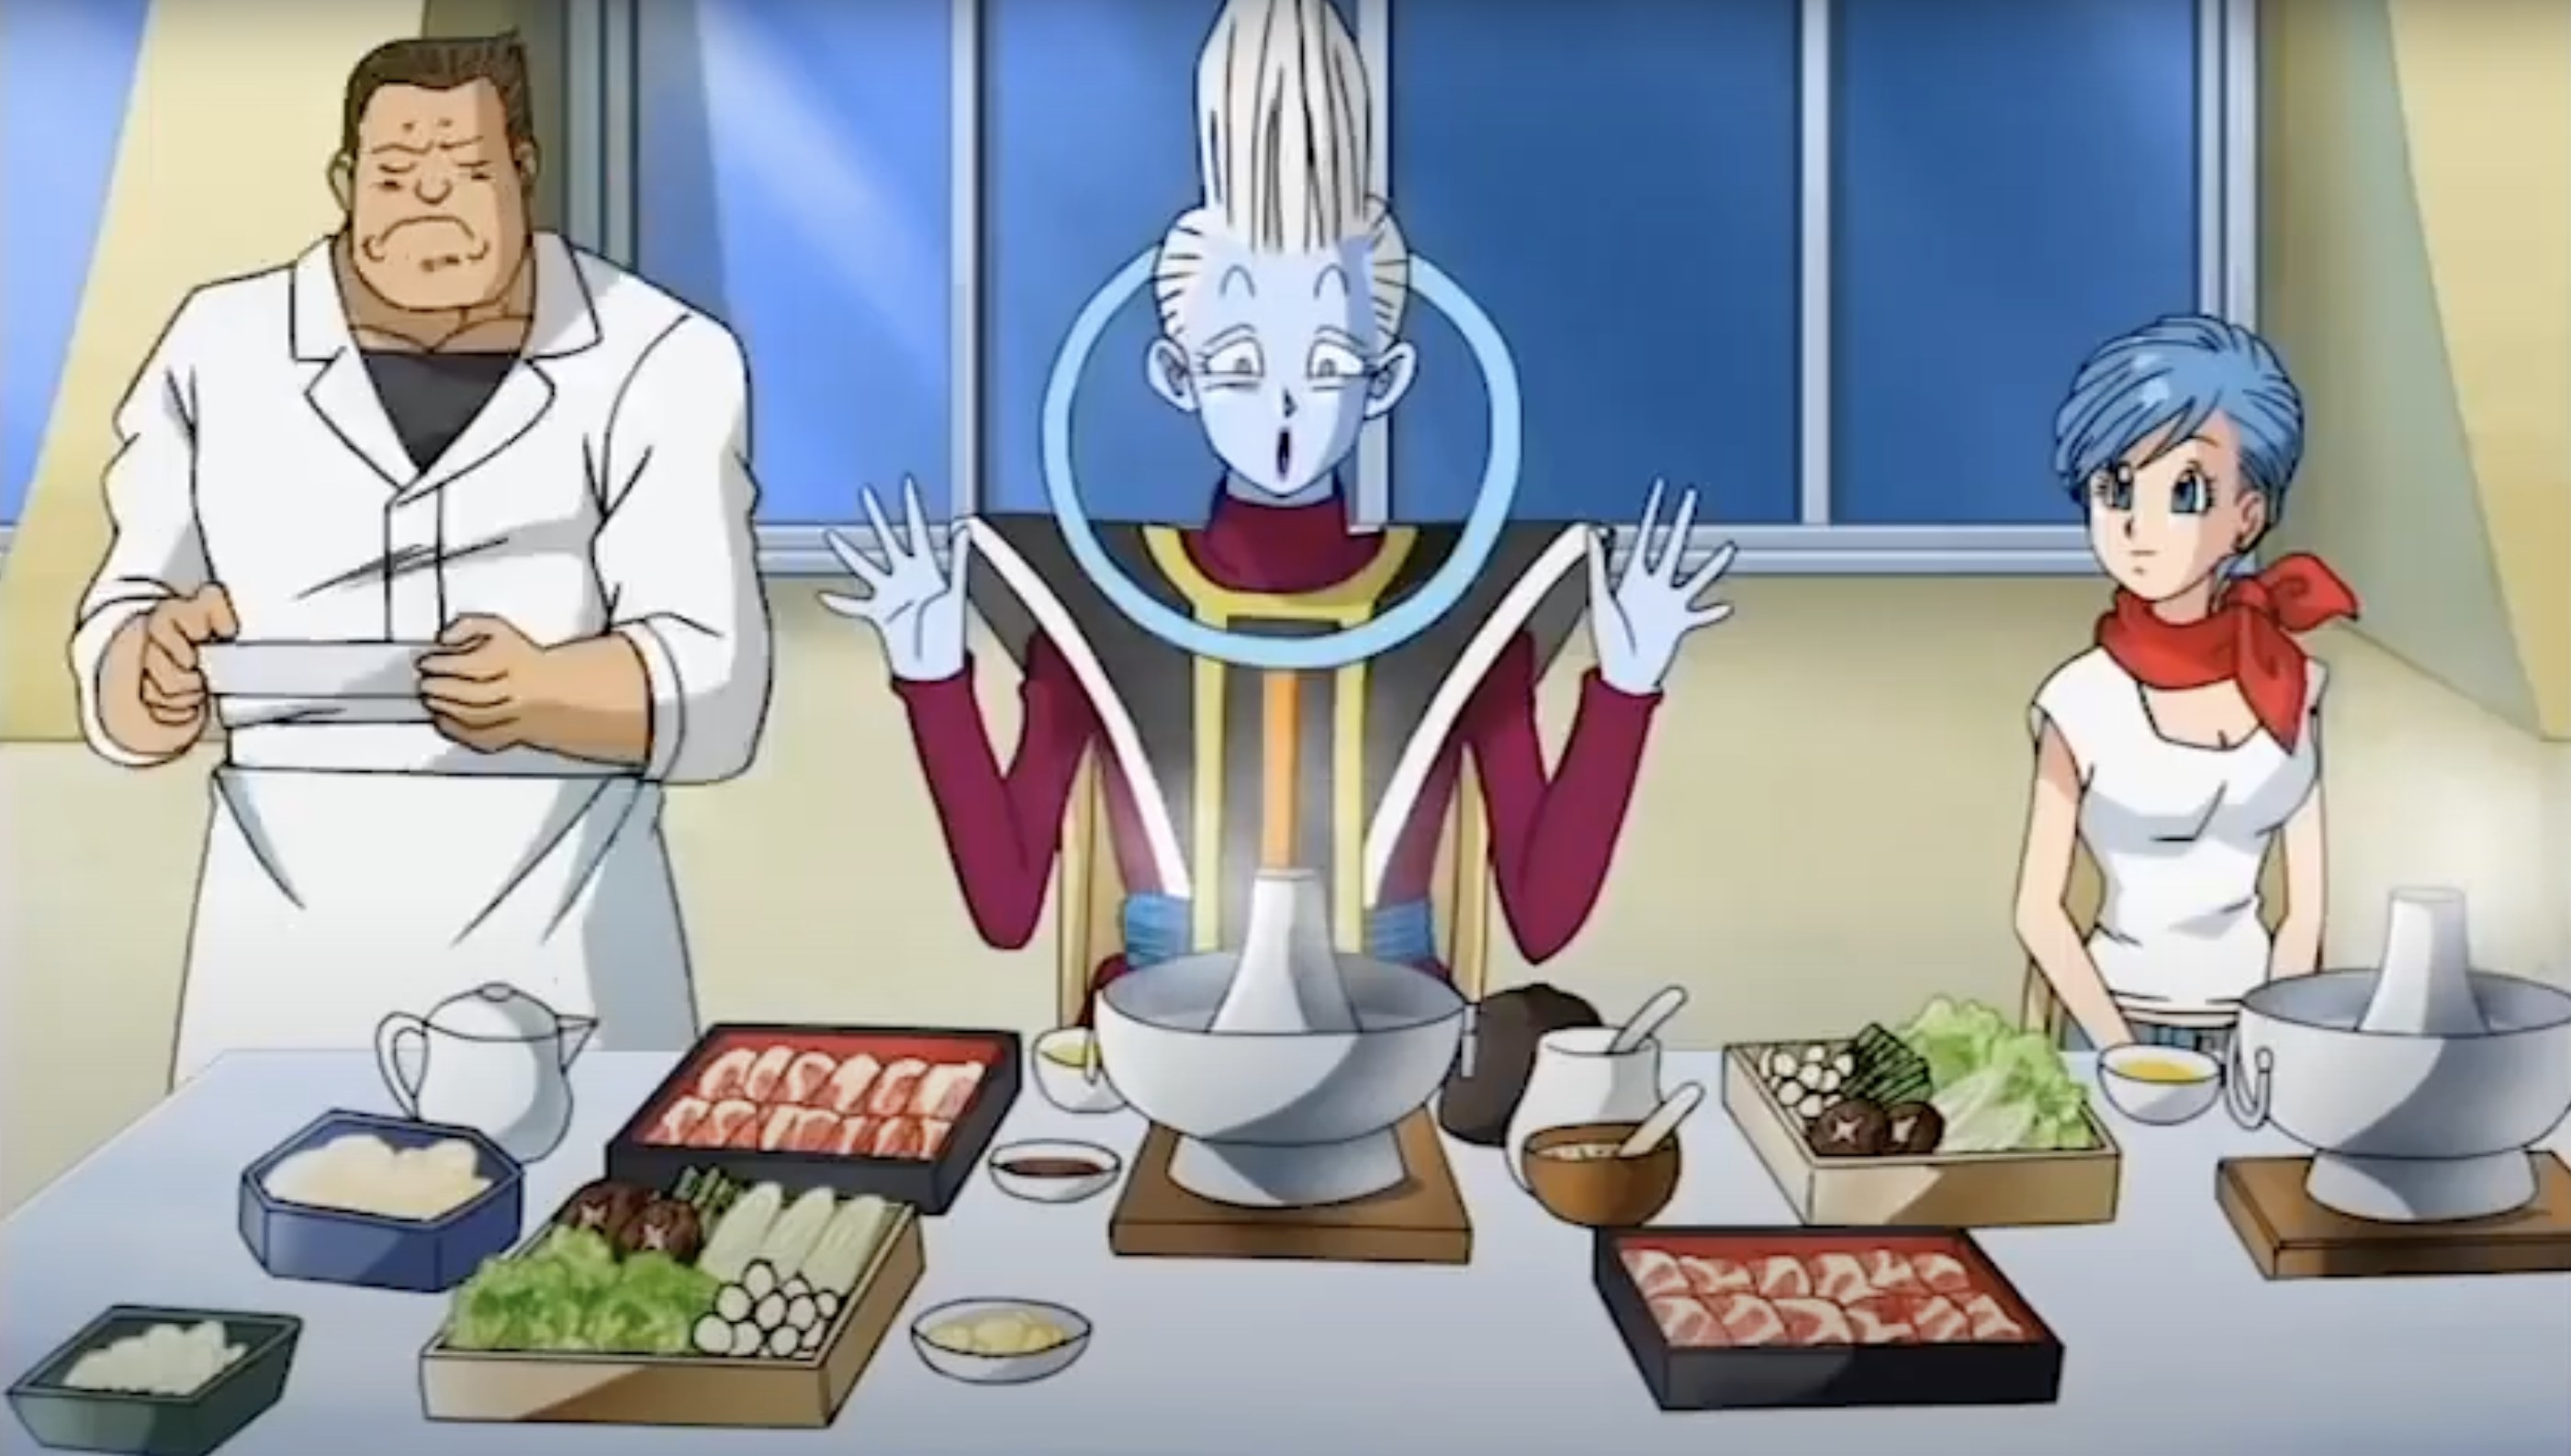 Whis gushes over a delicious dinner spread